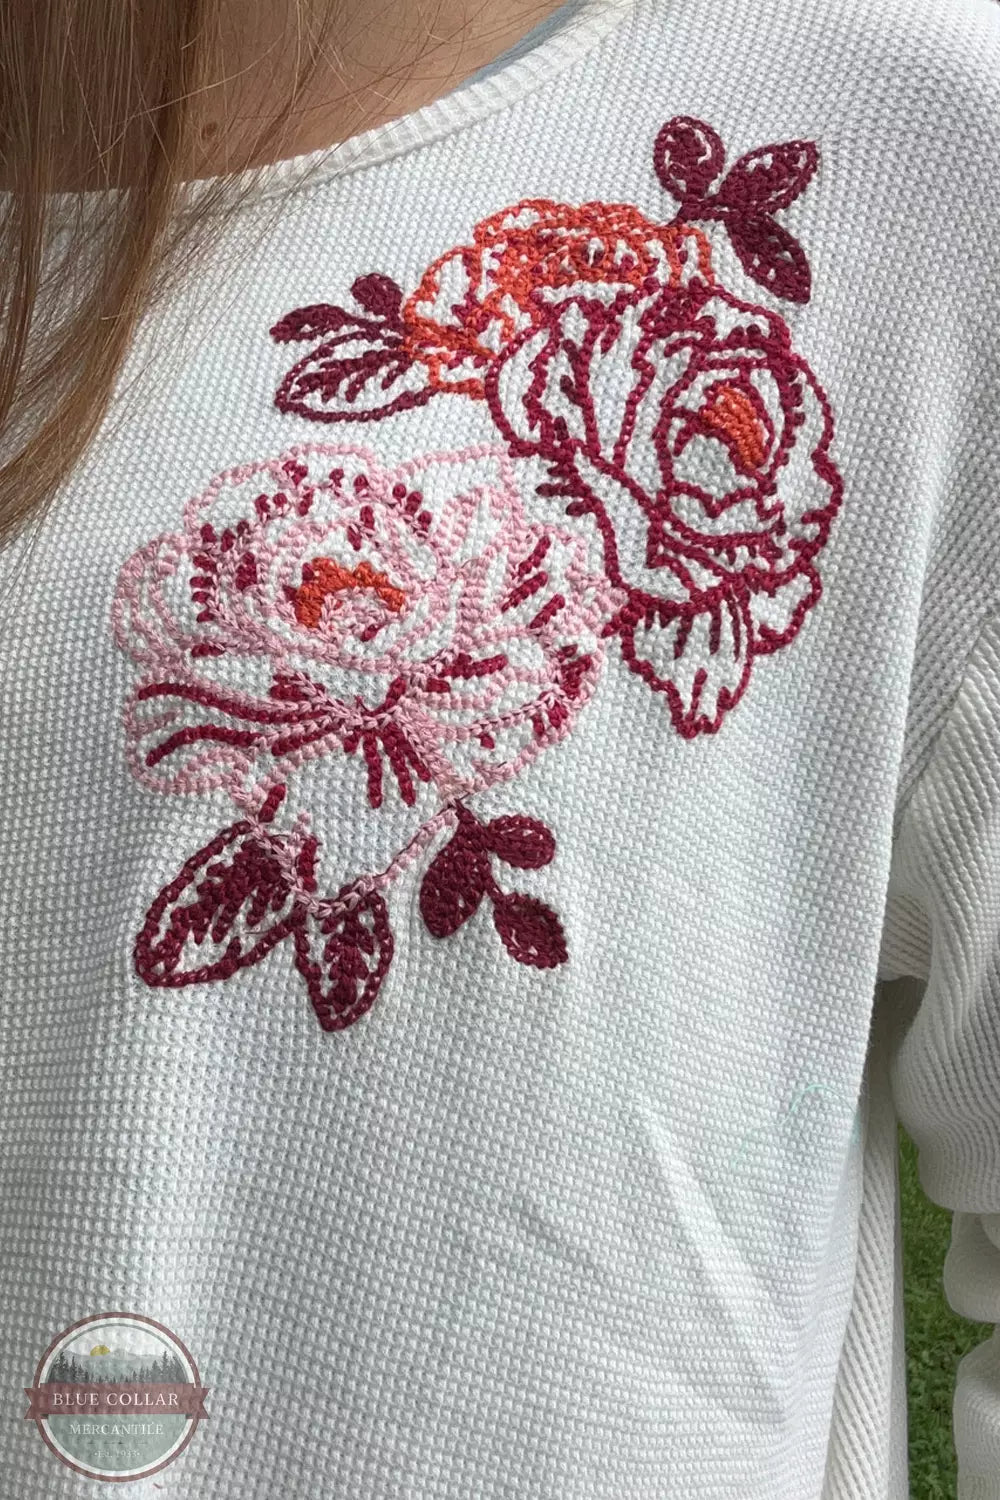 Roper 03-038-0513-6110 WH Waffle Weave Embroidered Rose Long Sleeve T-Shirt in White Detail View